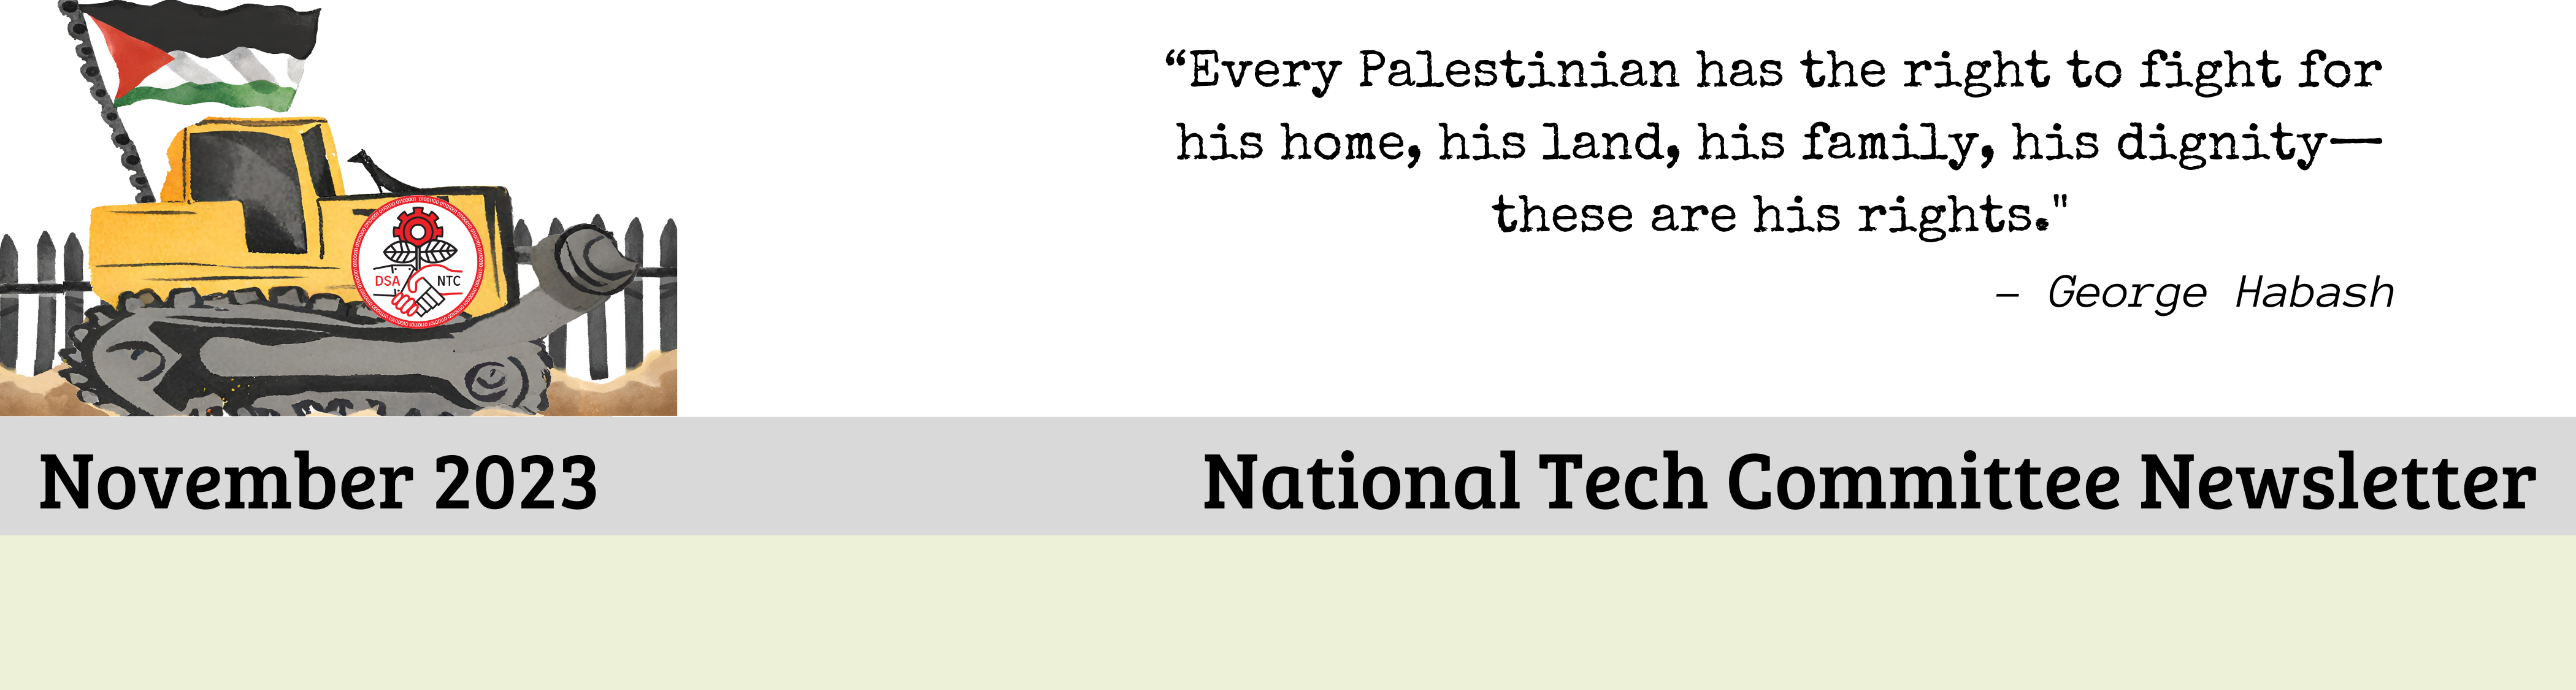 Every Palestinian has the right to fight for 
his home, his land, his family, his dignity—
these are his rights.
- George Habash
November 2023 National Tech Committee Newsletter